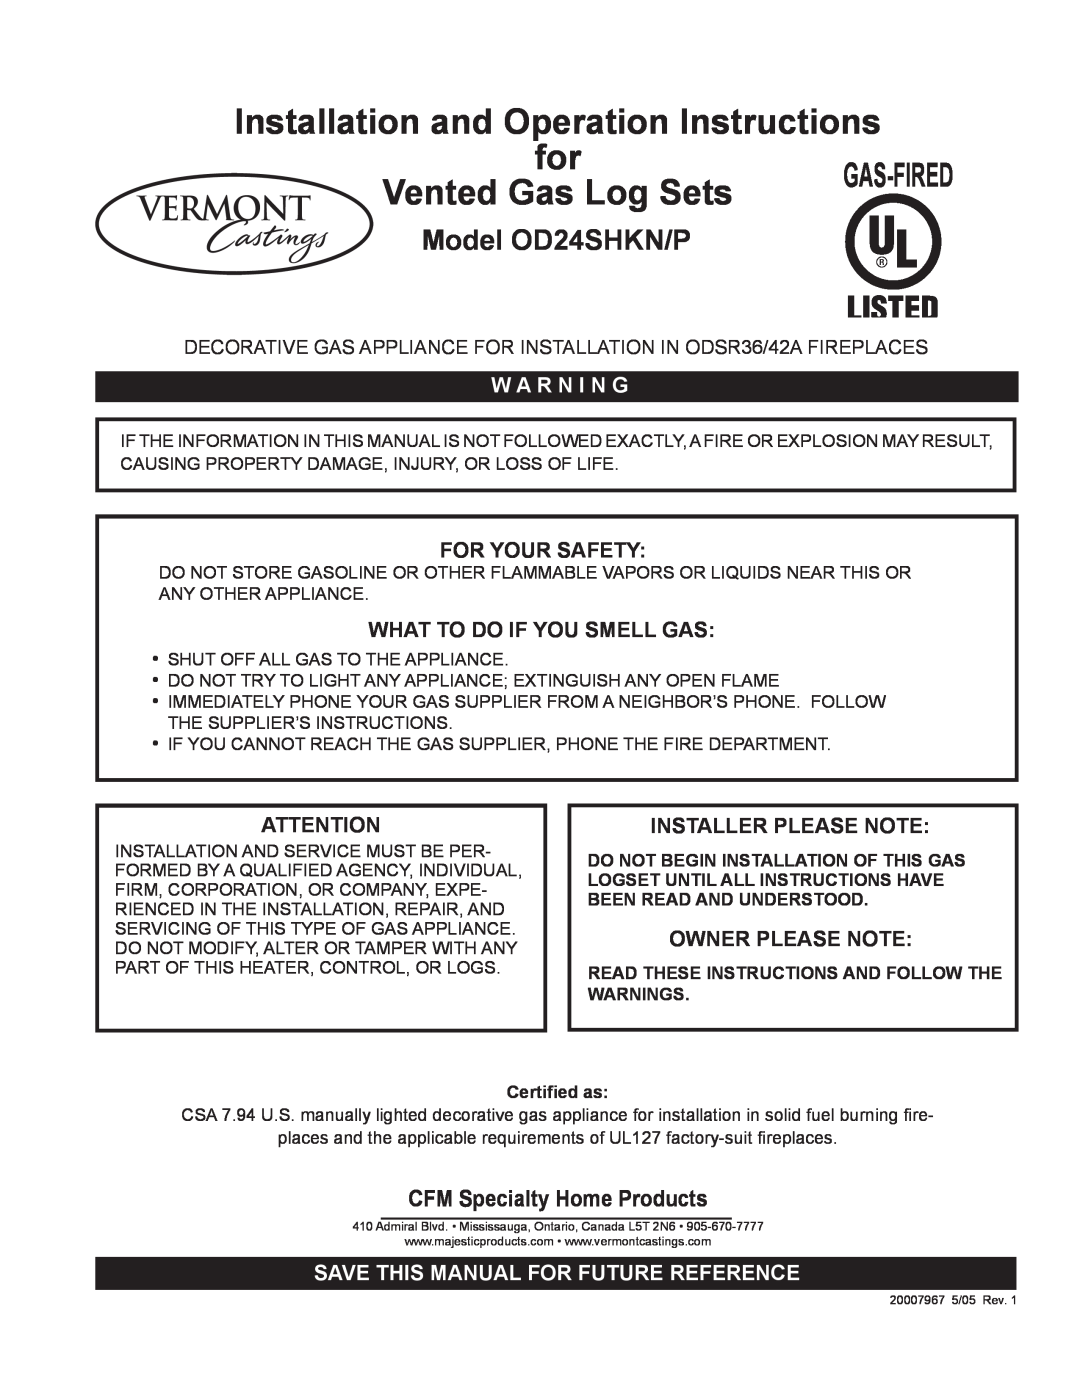 Vermont Casting P manual Installation and Operation Instructions, Vented Gas Log Sets, W A R N I N G, For Your Safety 